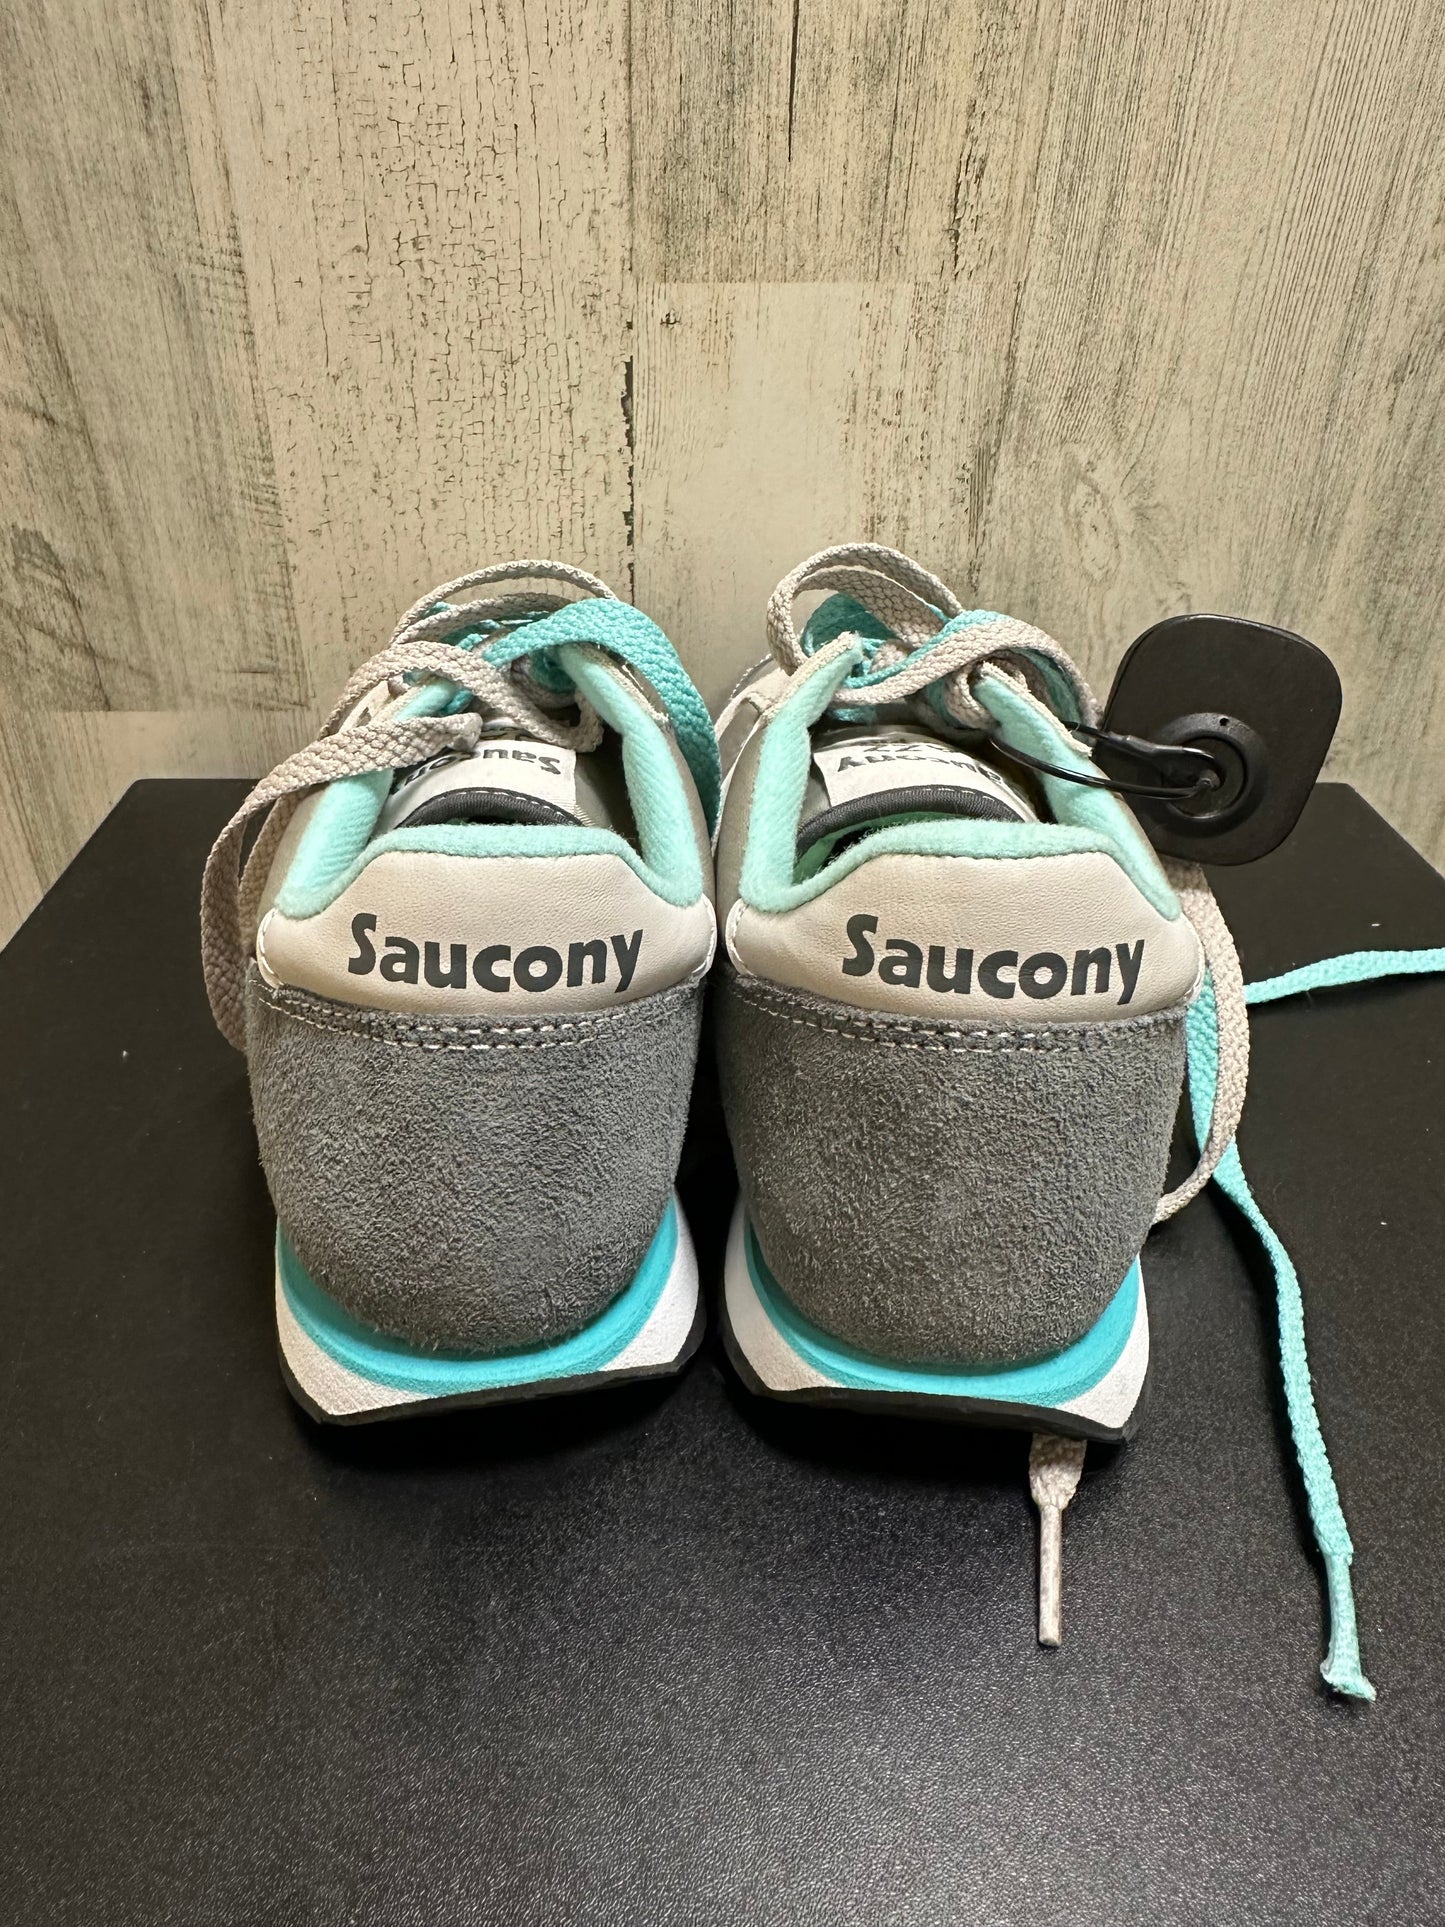 Grey Shoes Sneakers Saucony, Size 8.5